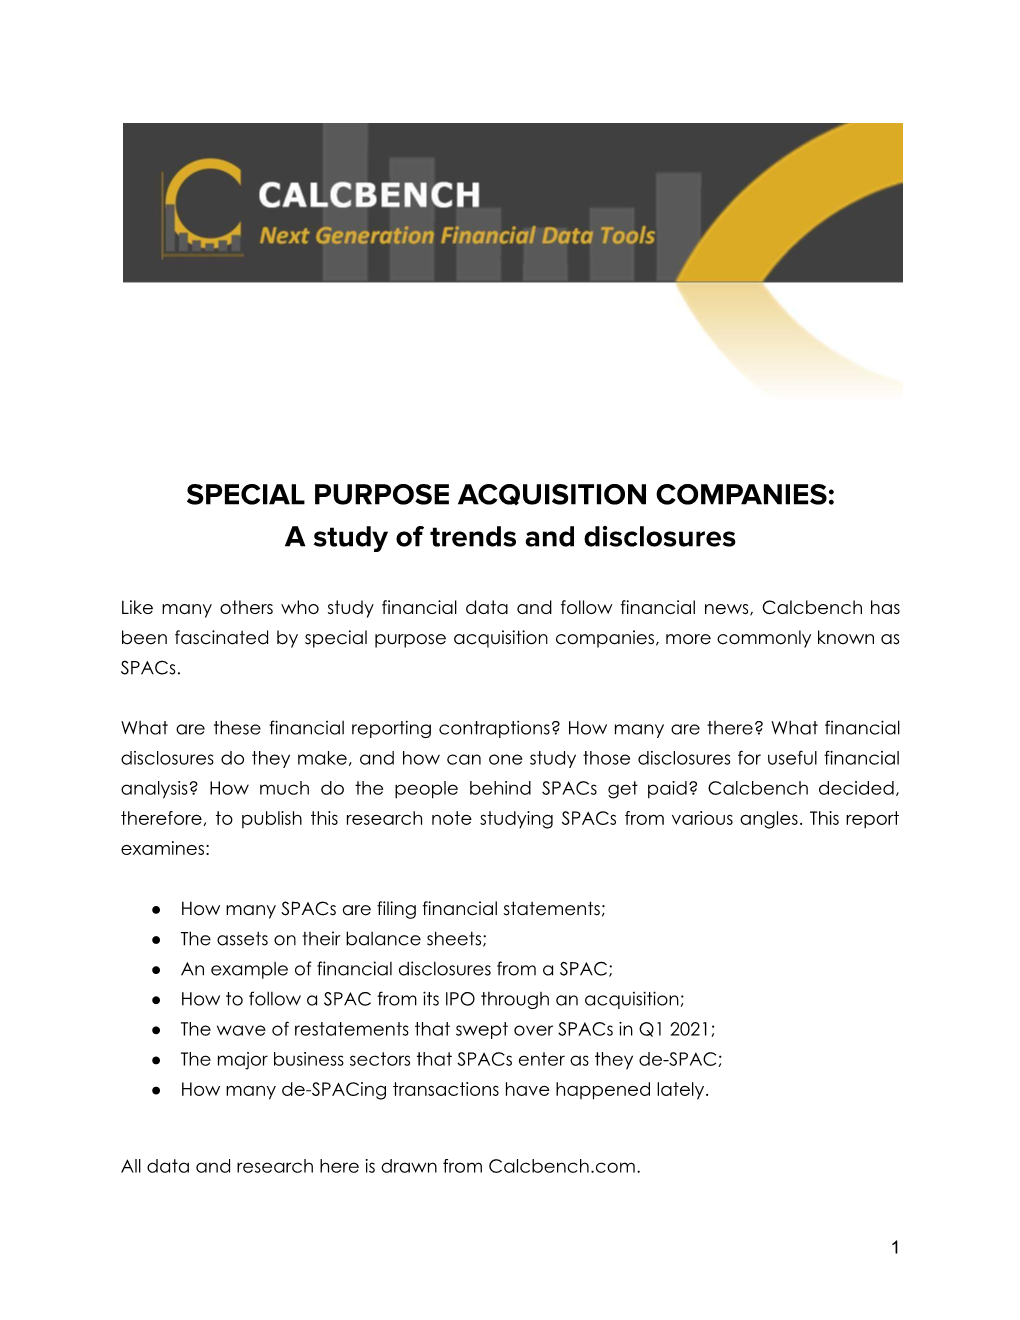 SPECIAL PURPOSE ACQUISITION COMPANIES: a Study of Trends and Disclosures